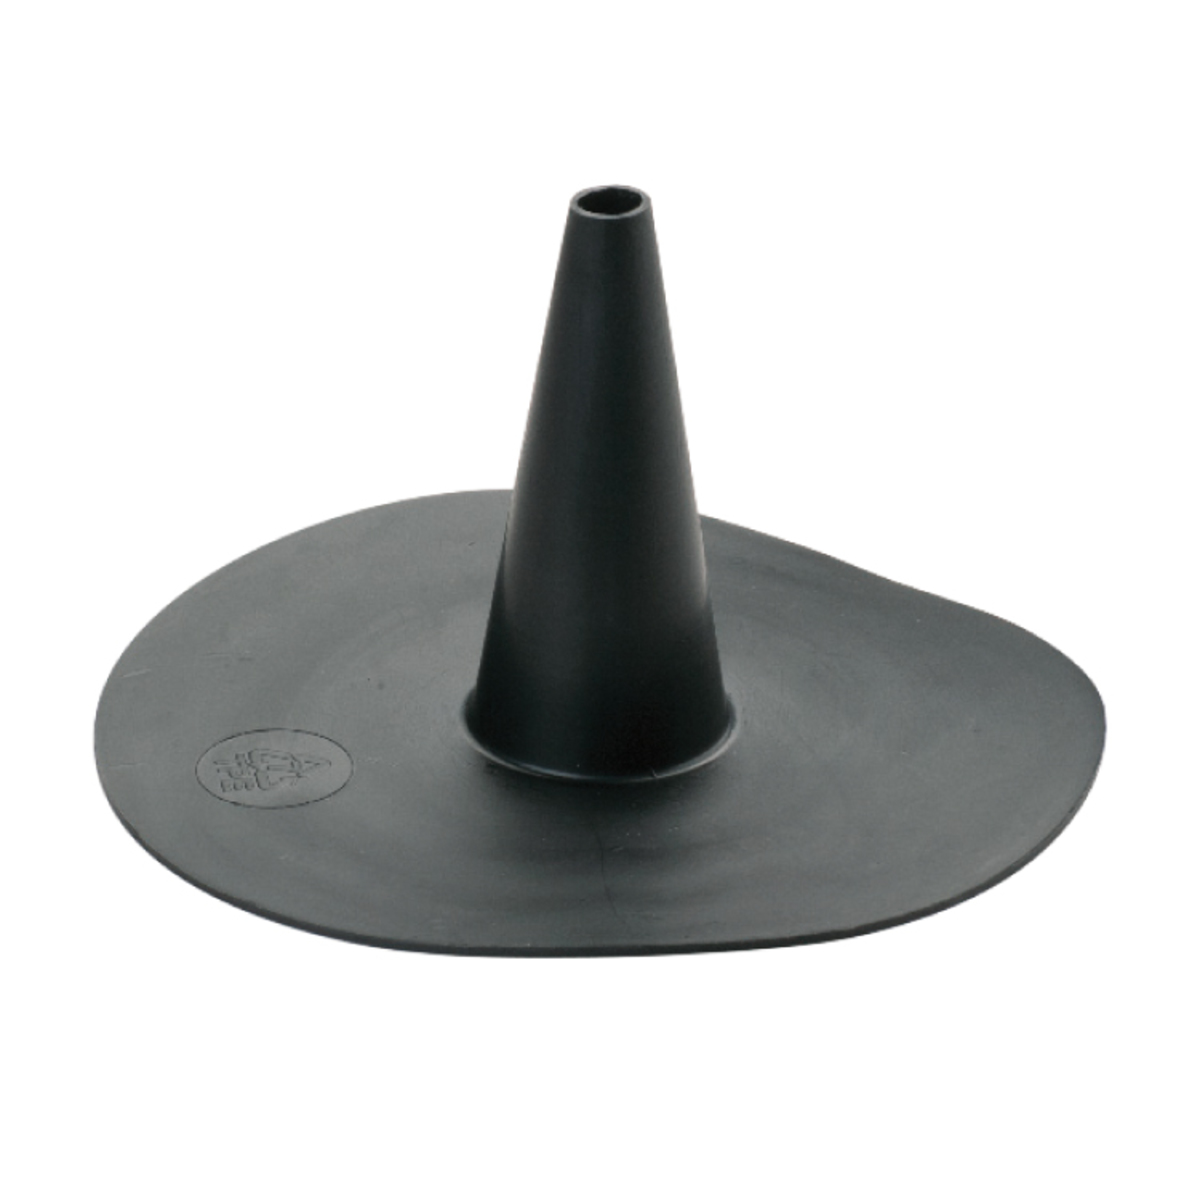 ECB conical base fitting for pipes - accessories for PVC and TPO ...